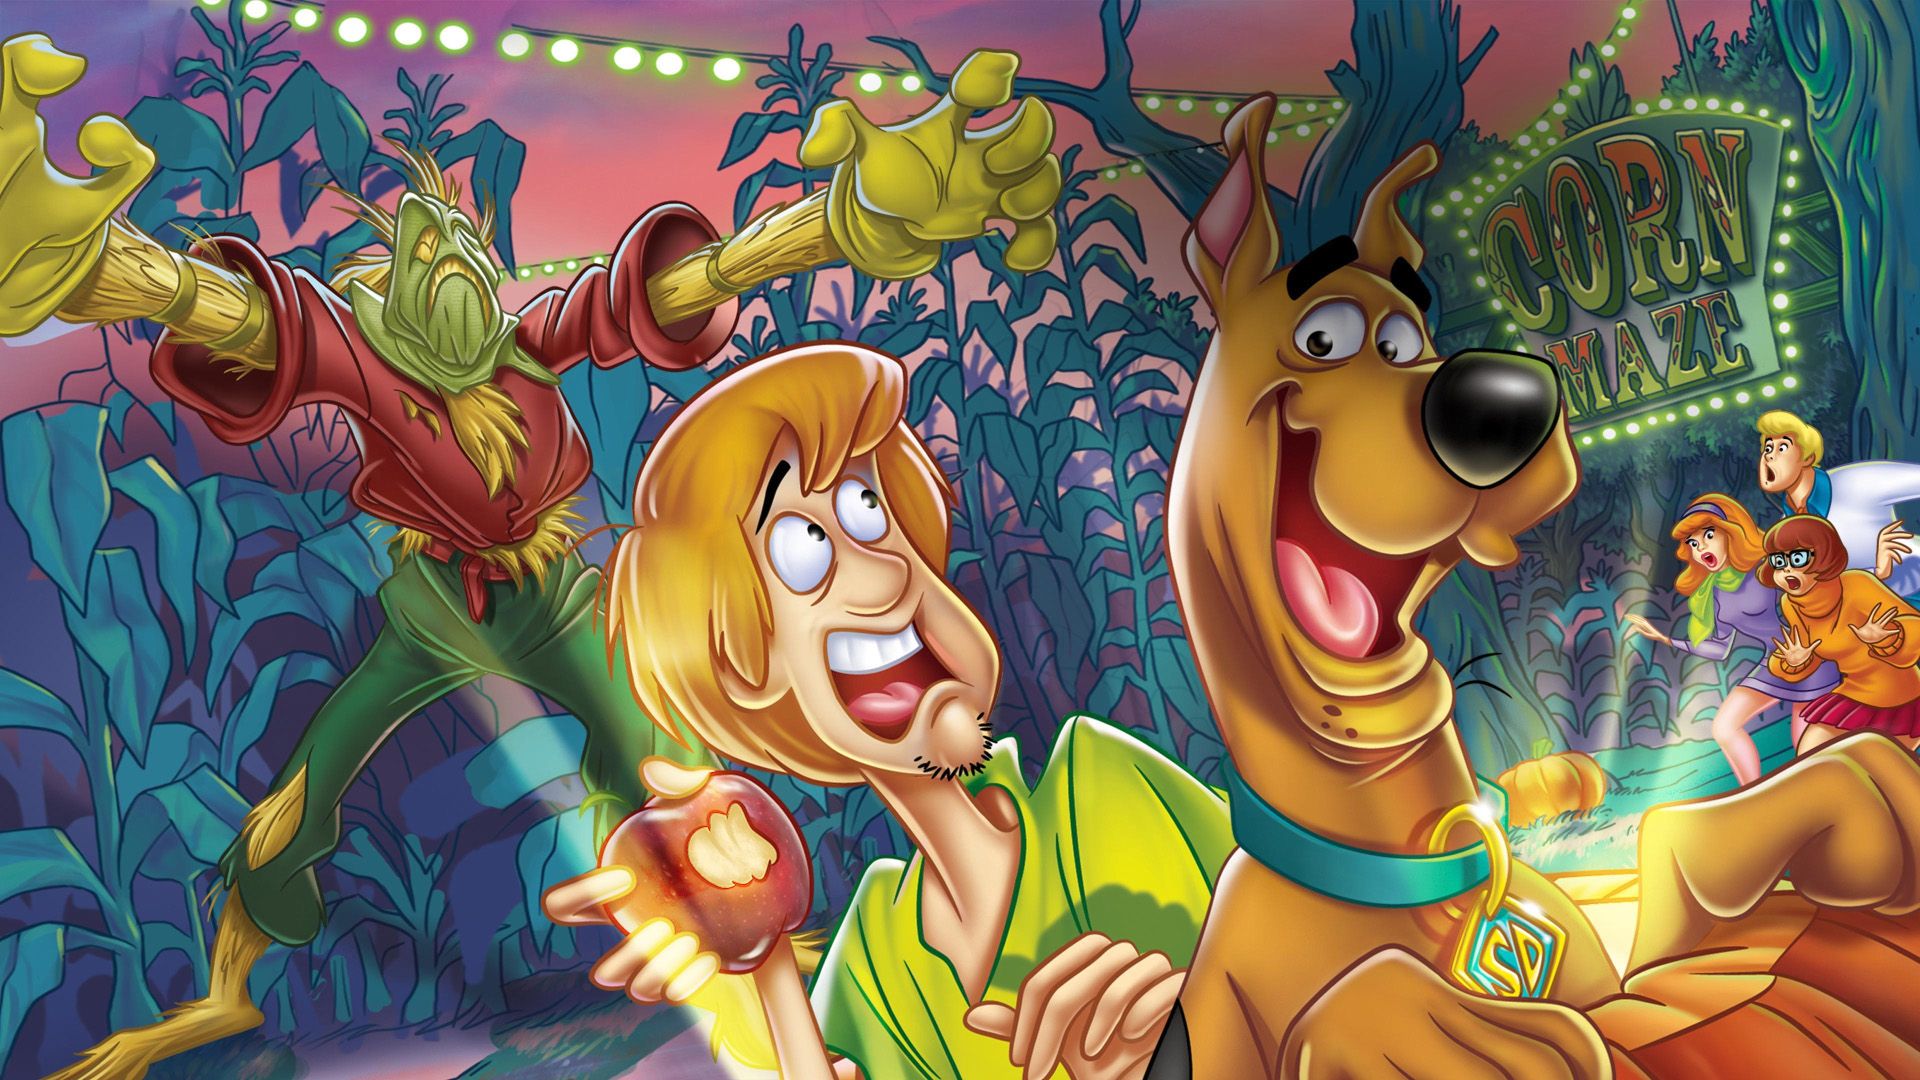 Scooby-Doo! and the Spooky Scarecrow background